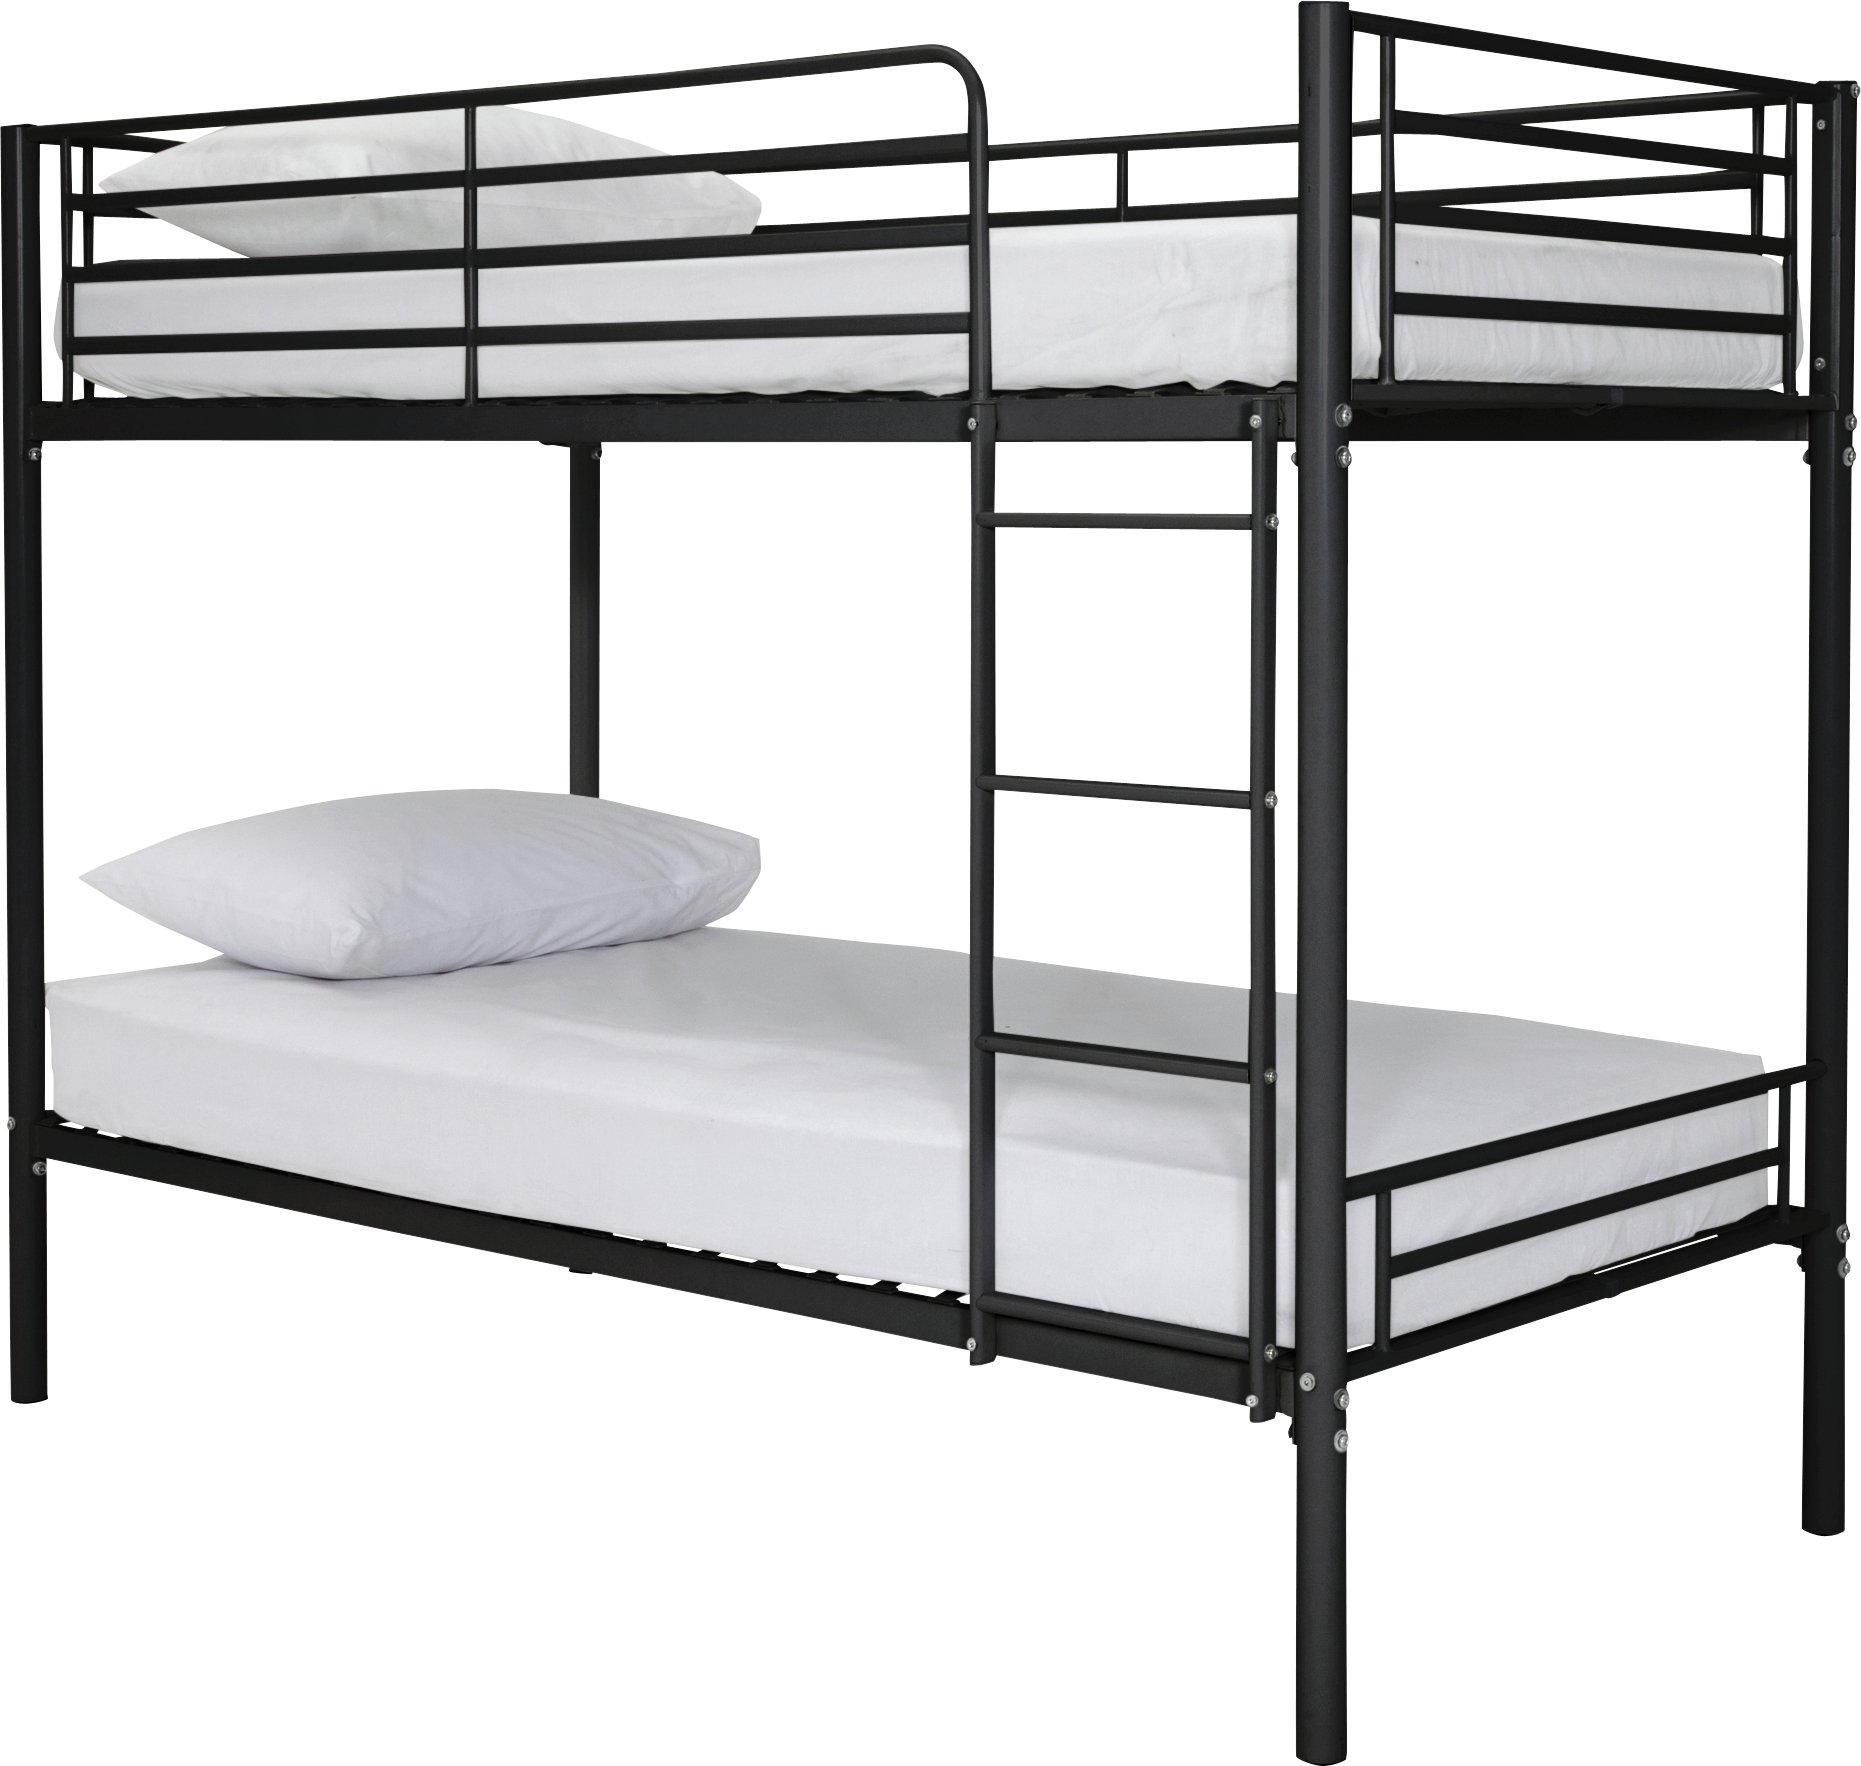 What is a shorty bunk bed